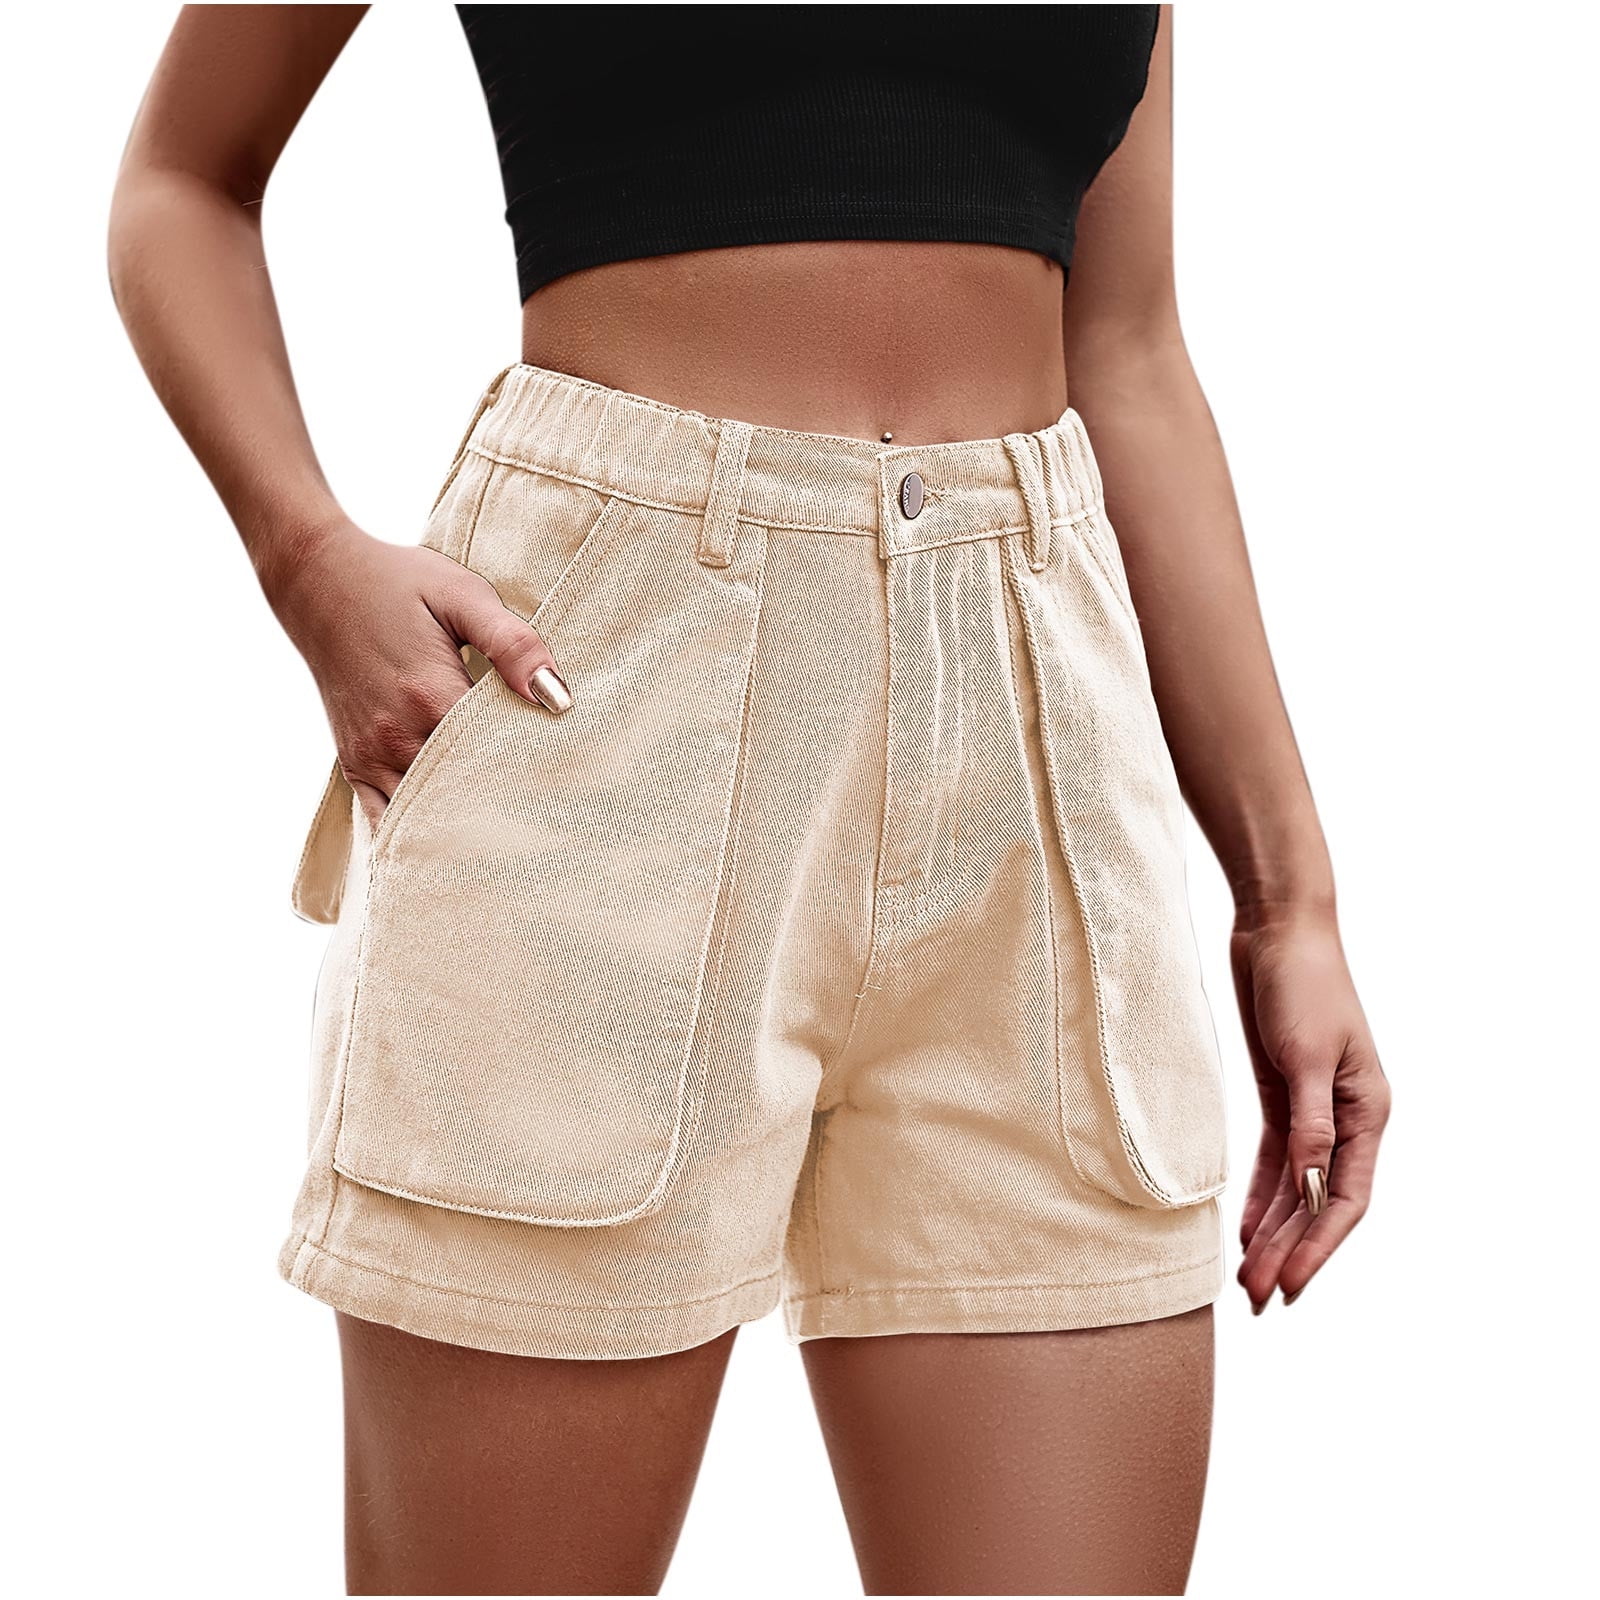 Women Classic Cargo Shorts Jeans High Waisted Cute Pants Thigh